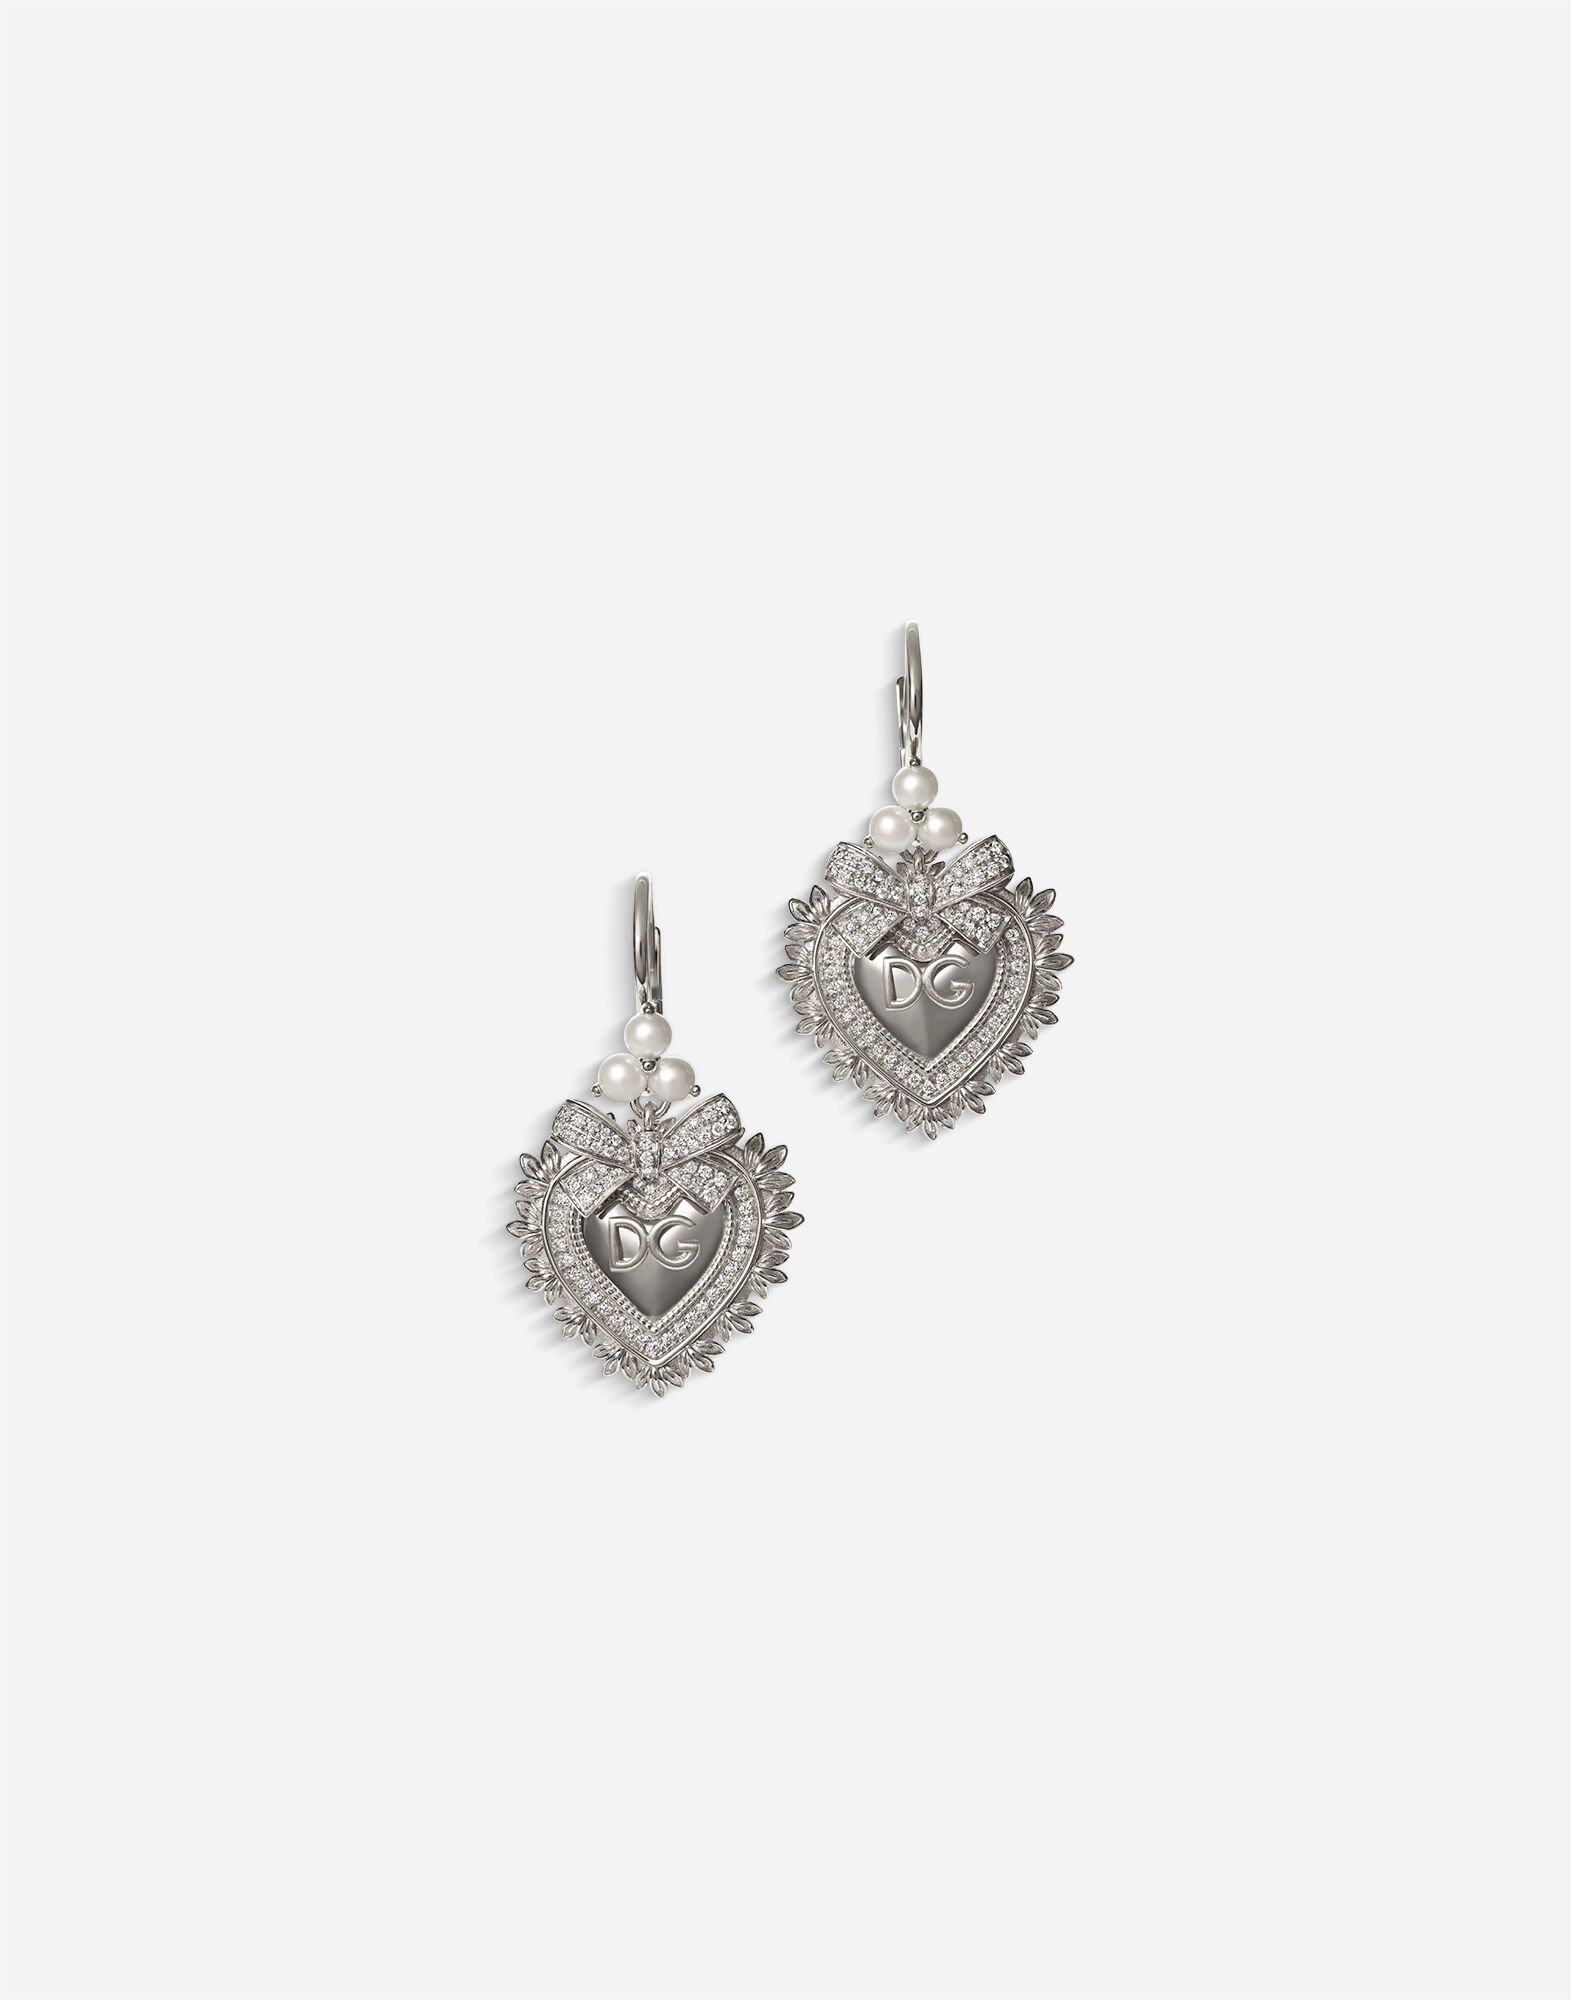 Dolce & Gabbana Devotion earrings in white gold with diamonds and pearls Yellow Gold WRLD1GWDWYE